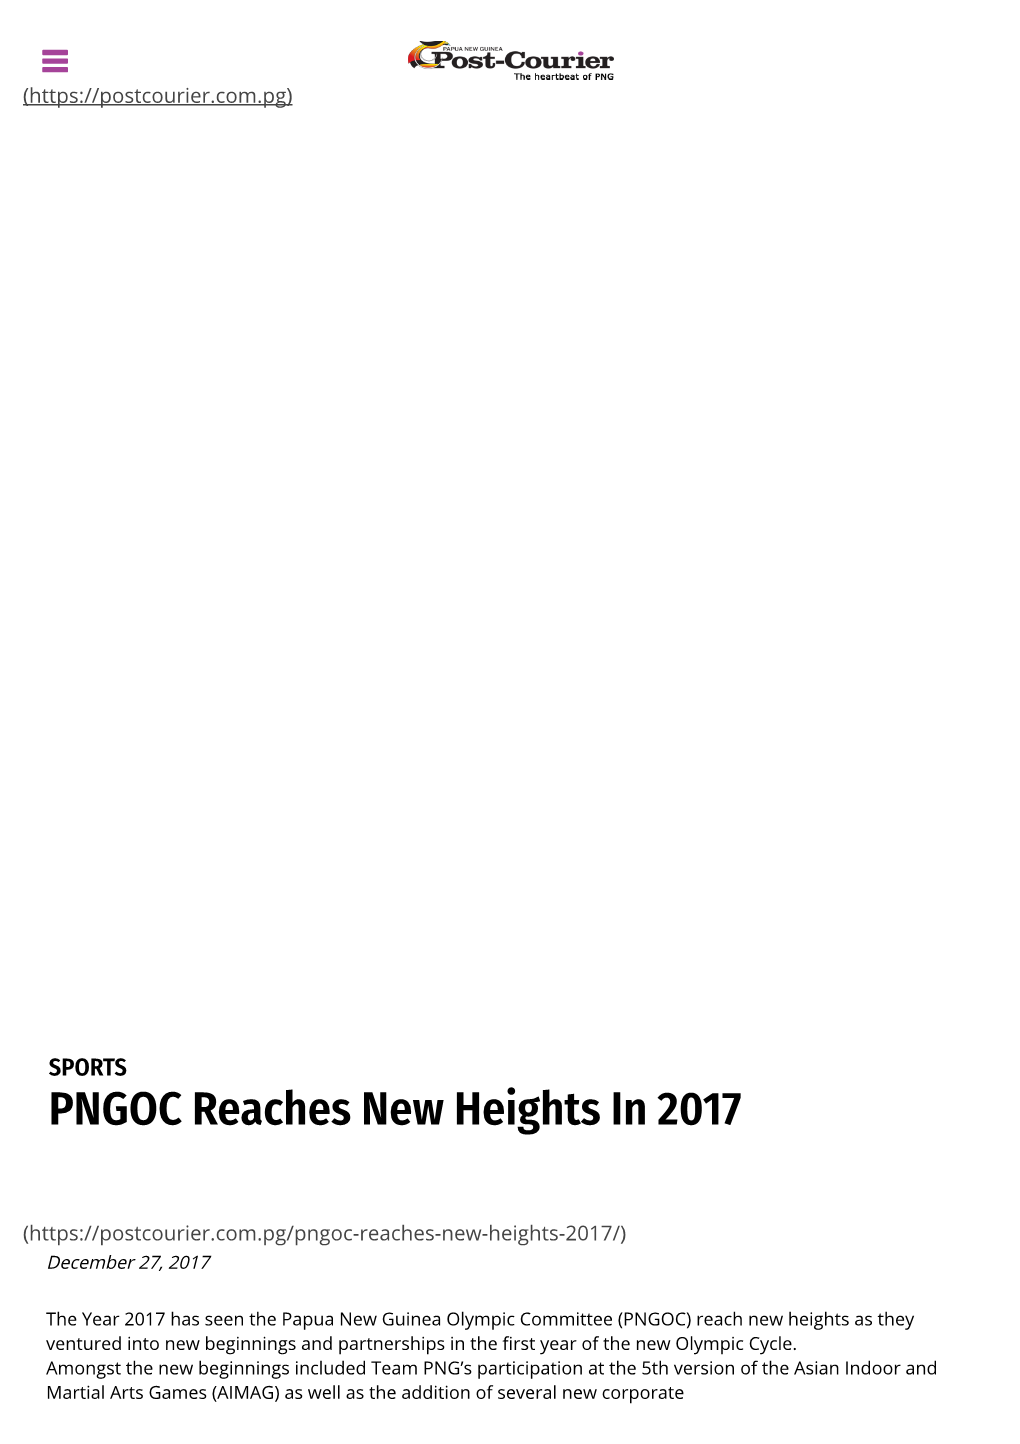 PNGOC Reaches New Heights in 2017